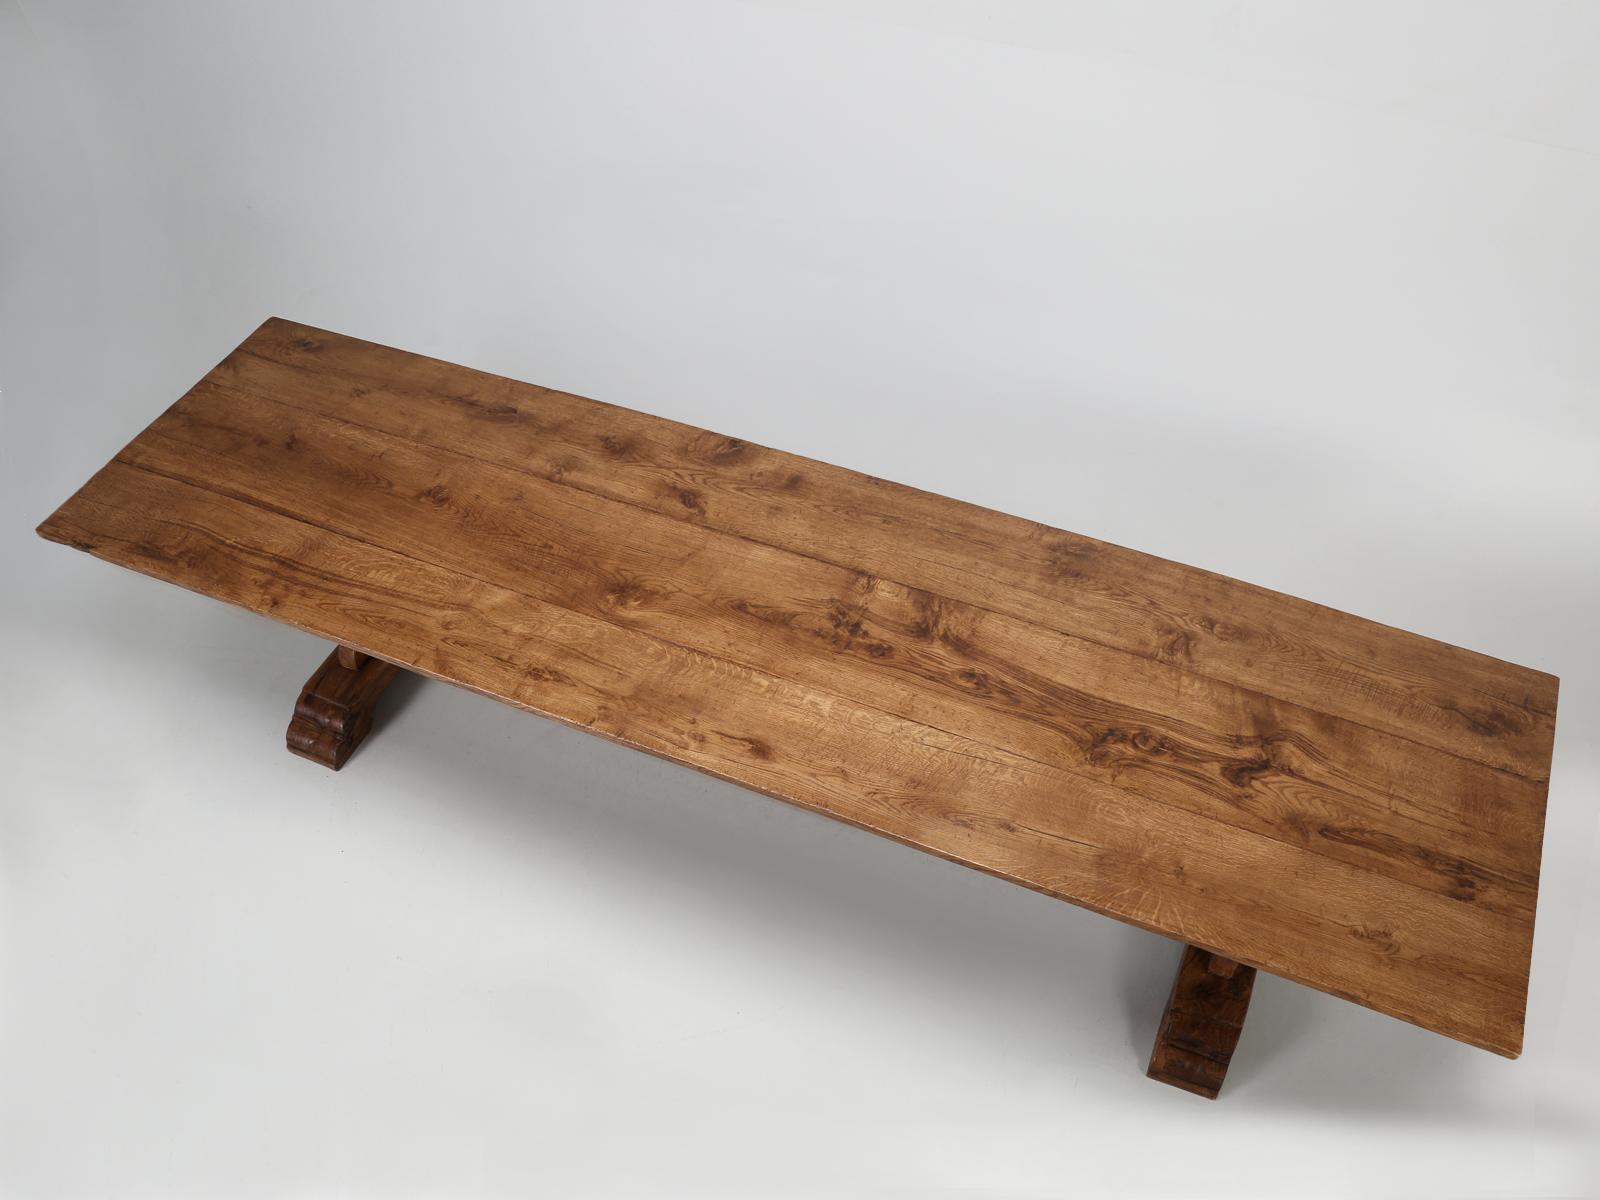 Mammoth, 12’ French trestle table, that will comfortably seat 14 people and in a pinch, will seat 16. The French trestle tabletop, is composed of only 3 very wide boards, with incredible grain and an aged deep wax finish. Although this French